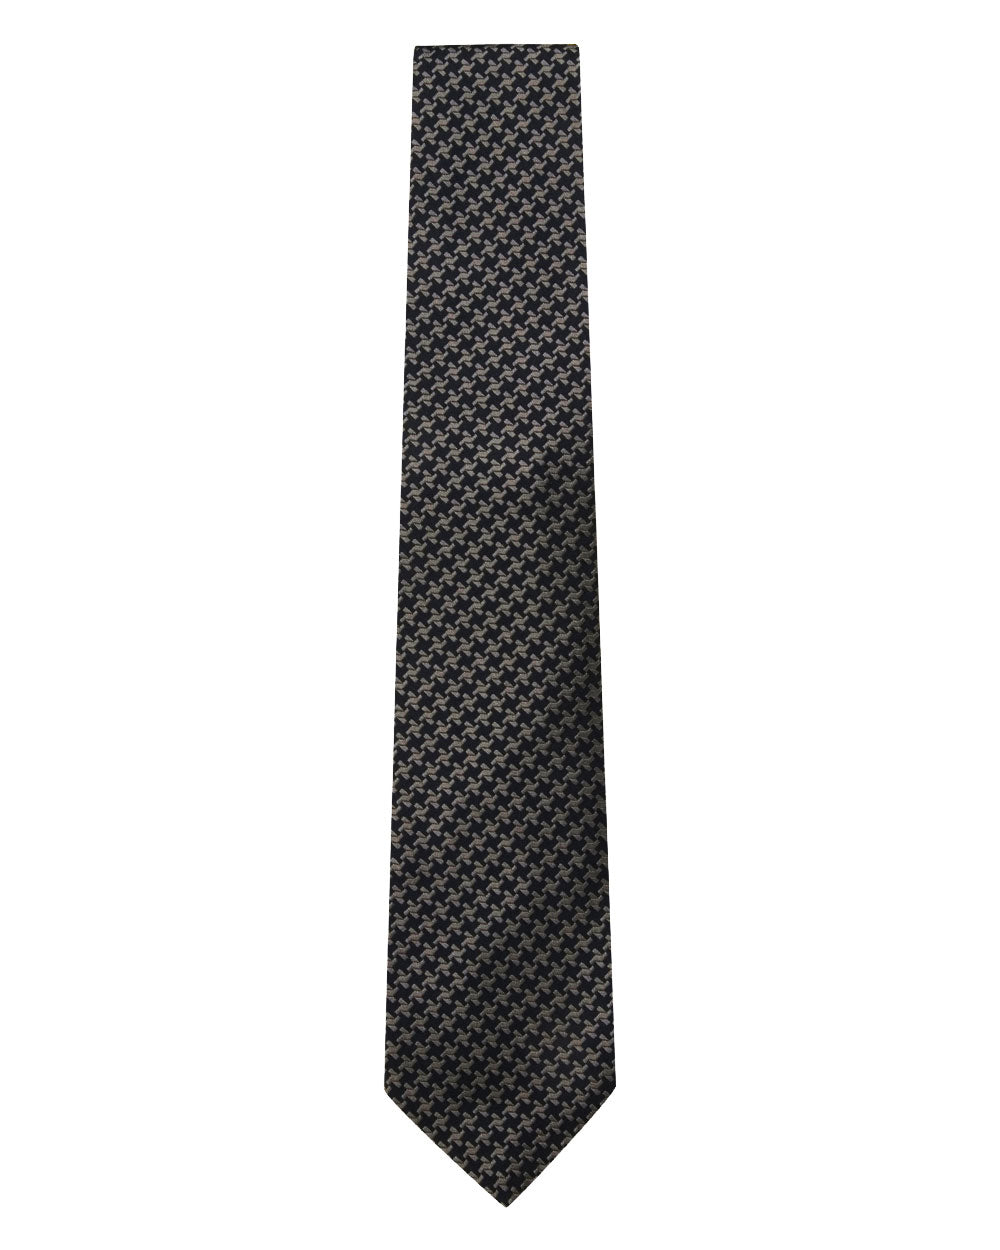 Charcoal Mini Houndstooth Tie